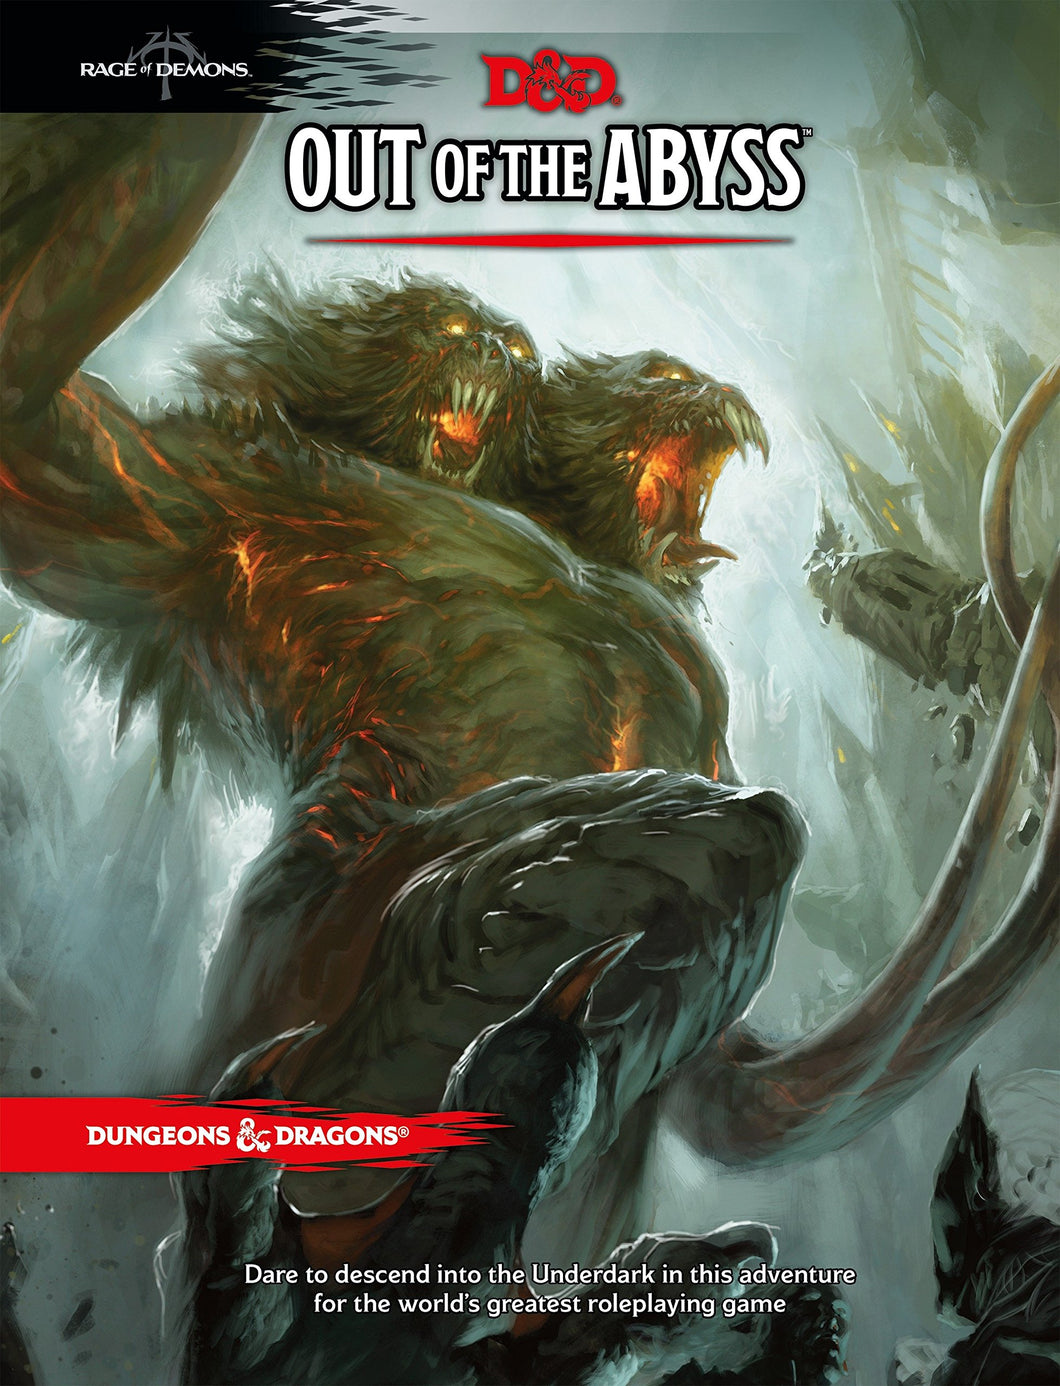 Dungeons & Dragons (D&D) : 5th Edition Out of the Abyss